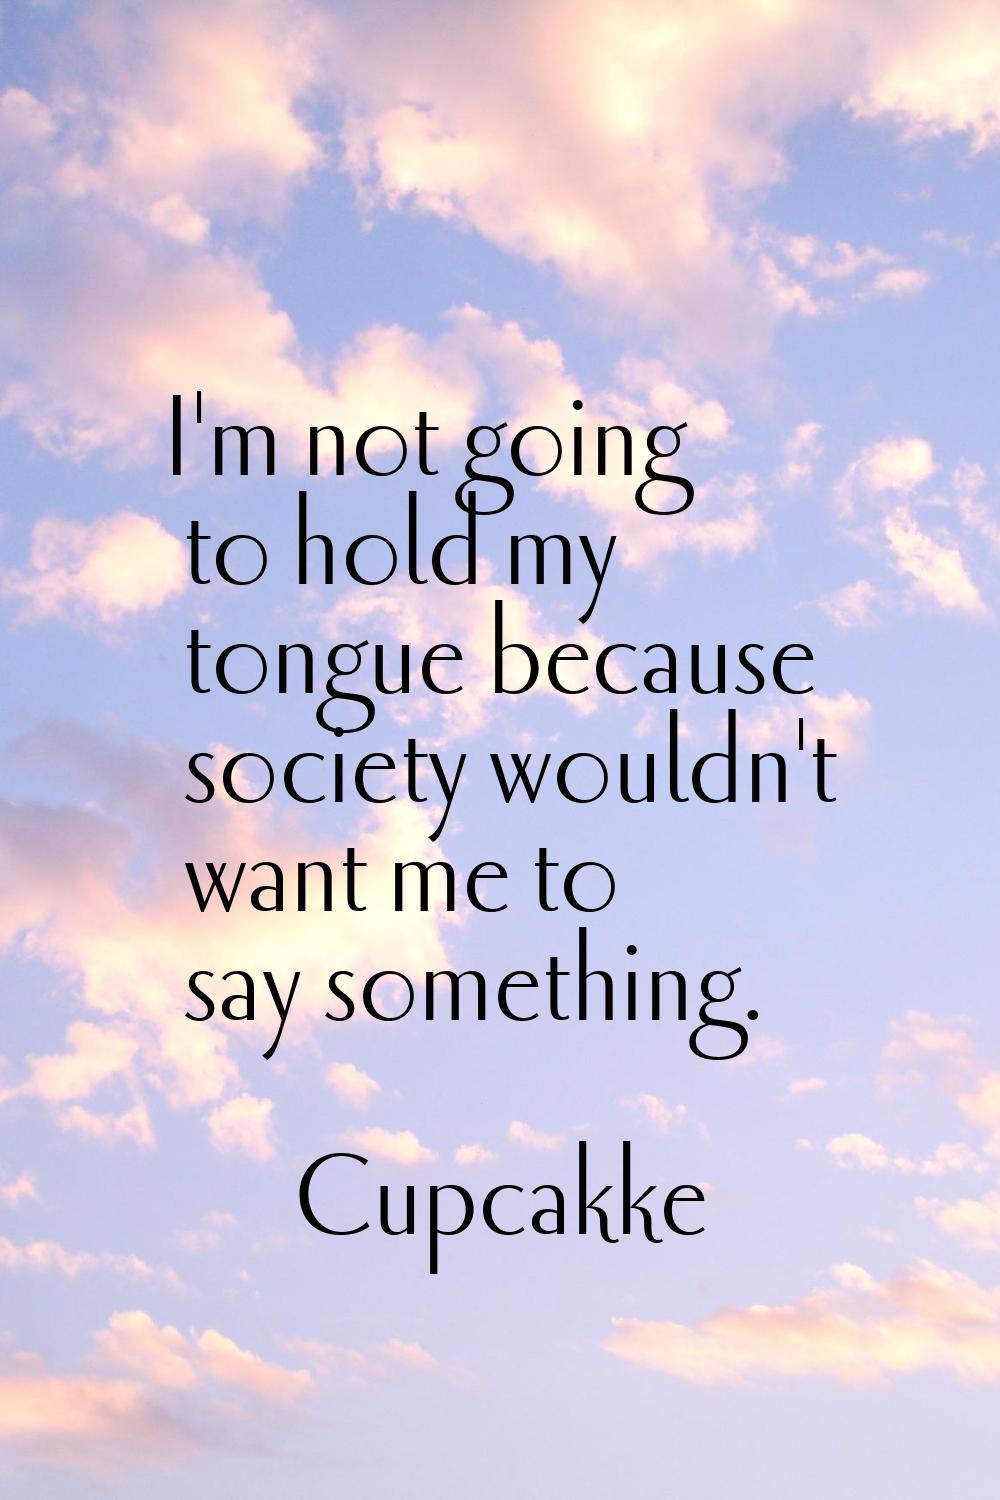 I'm not going to hold my tongue because society wouldn't want me to say something.